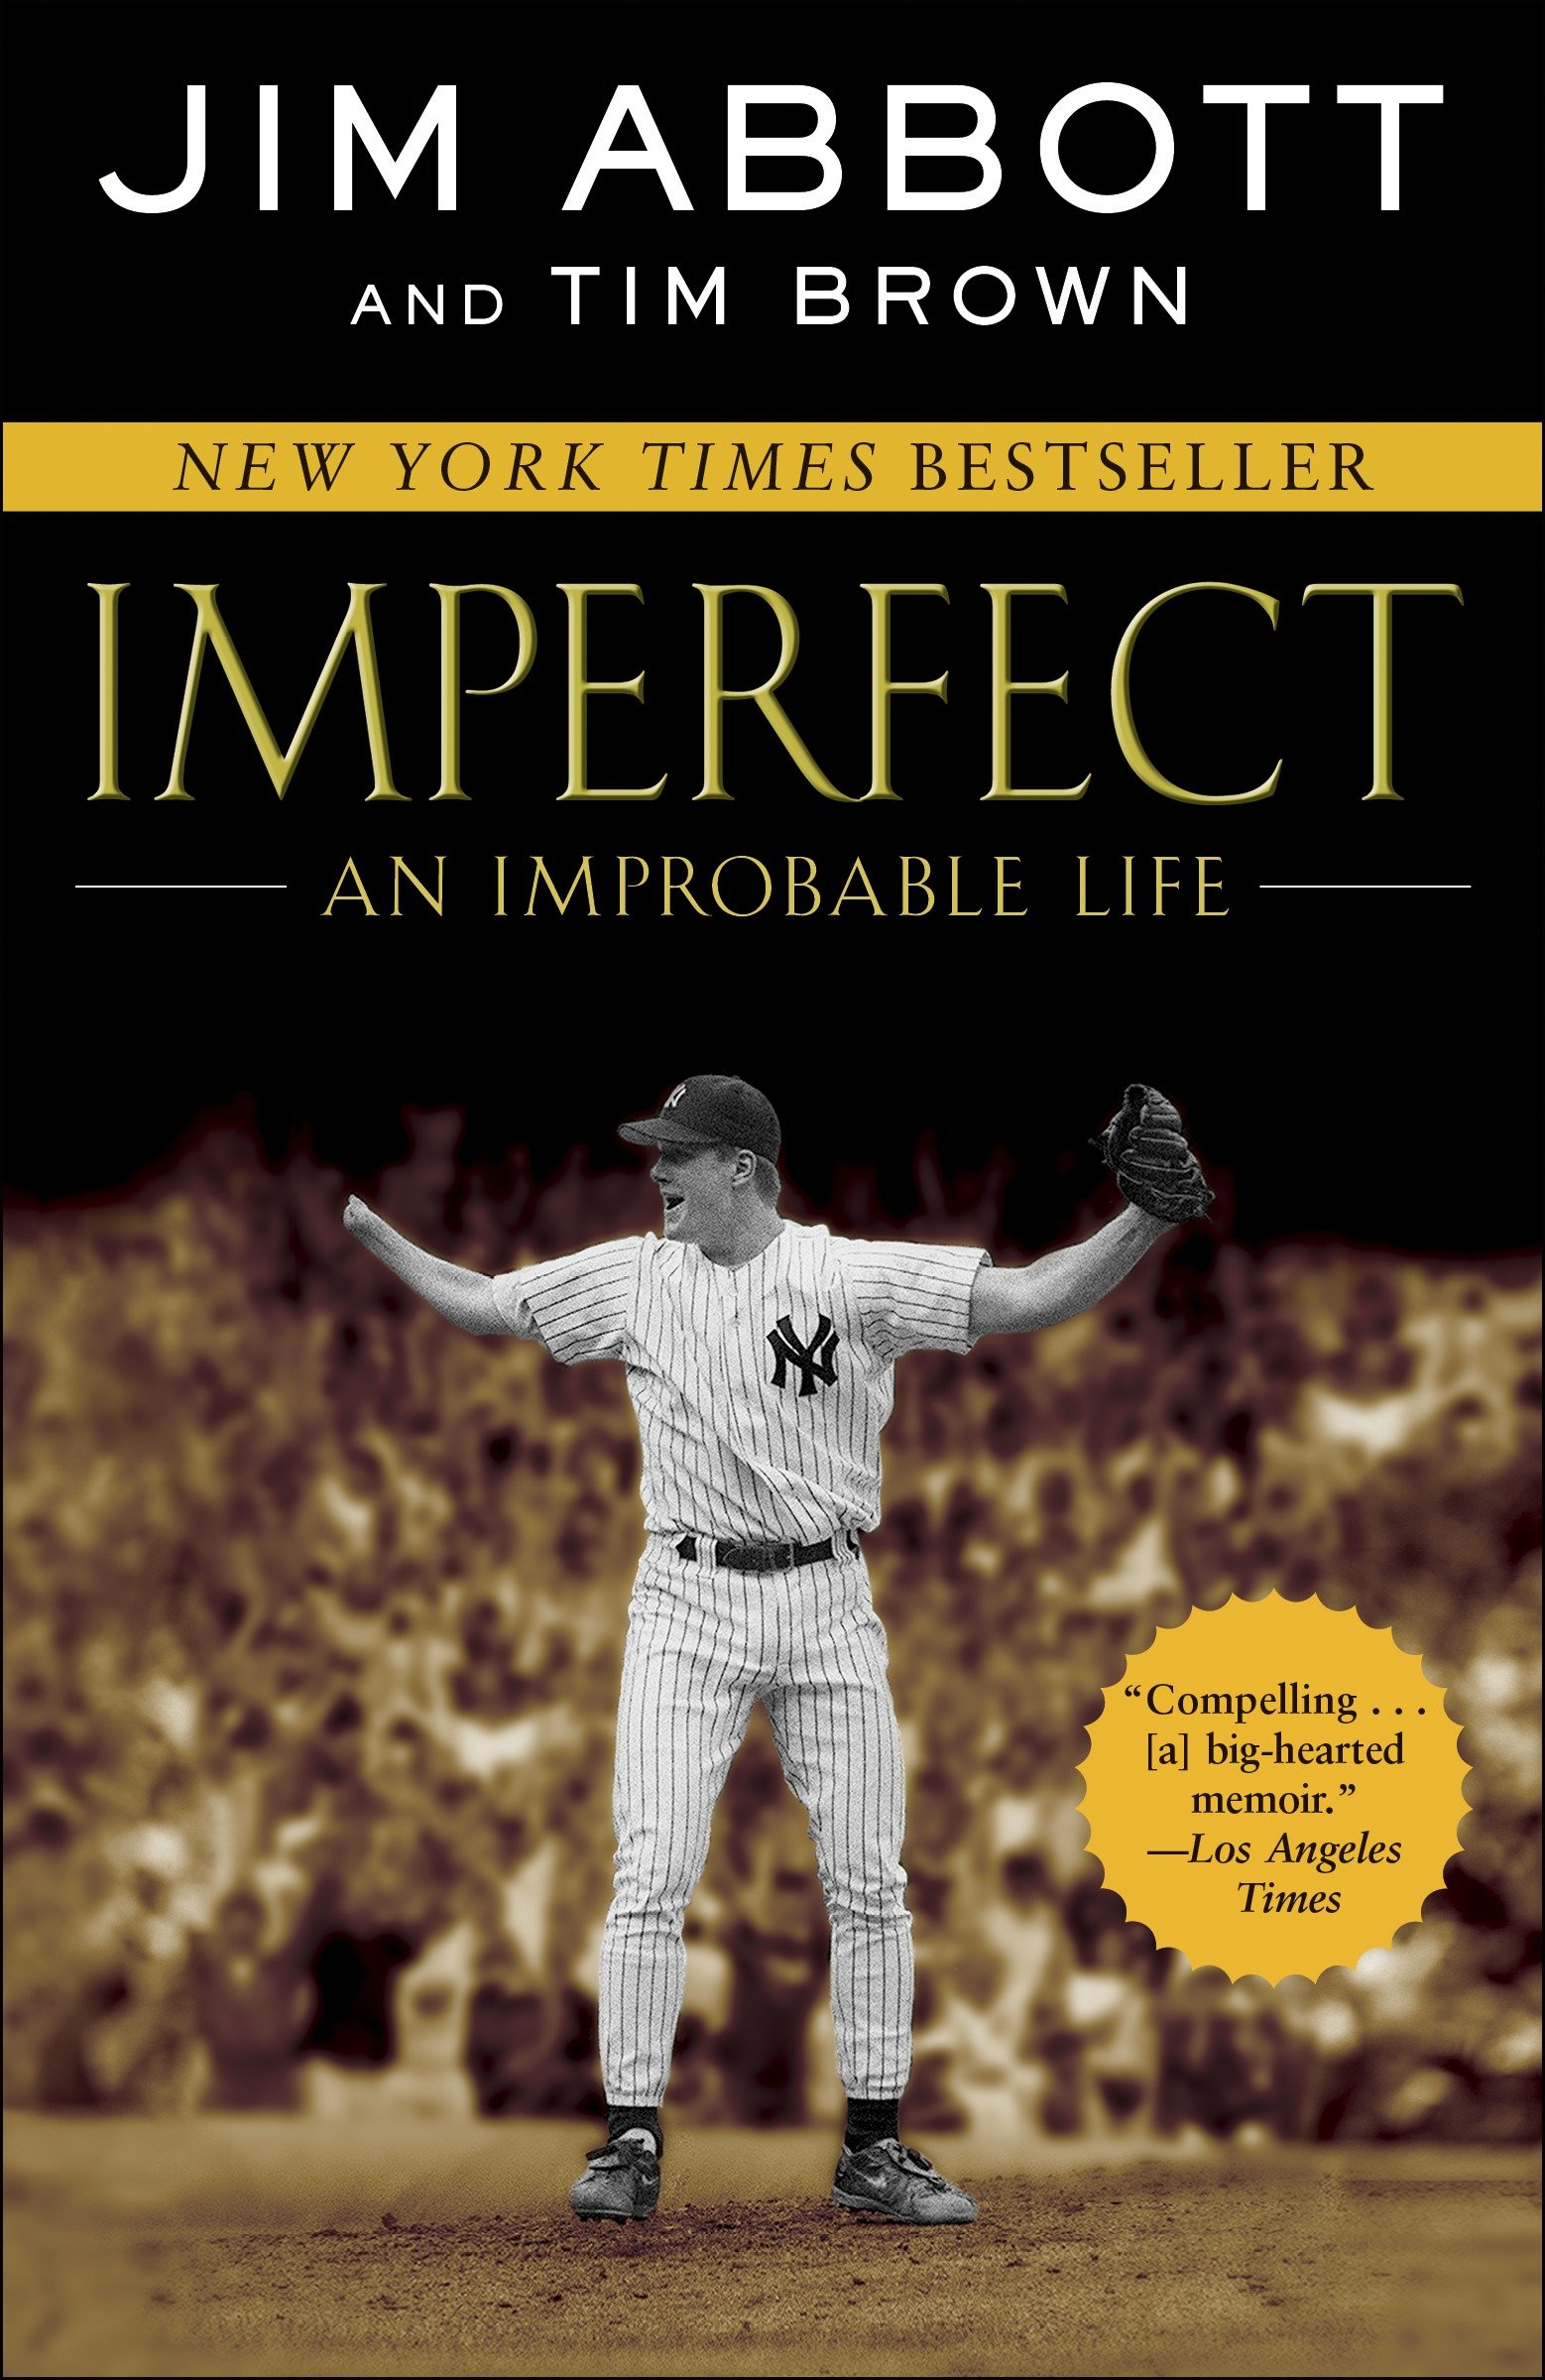 Imperfect an improbable life cover image